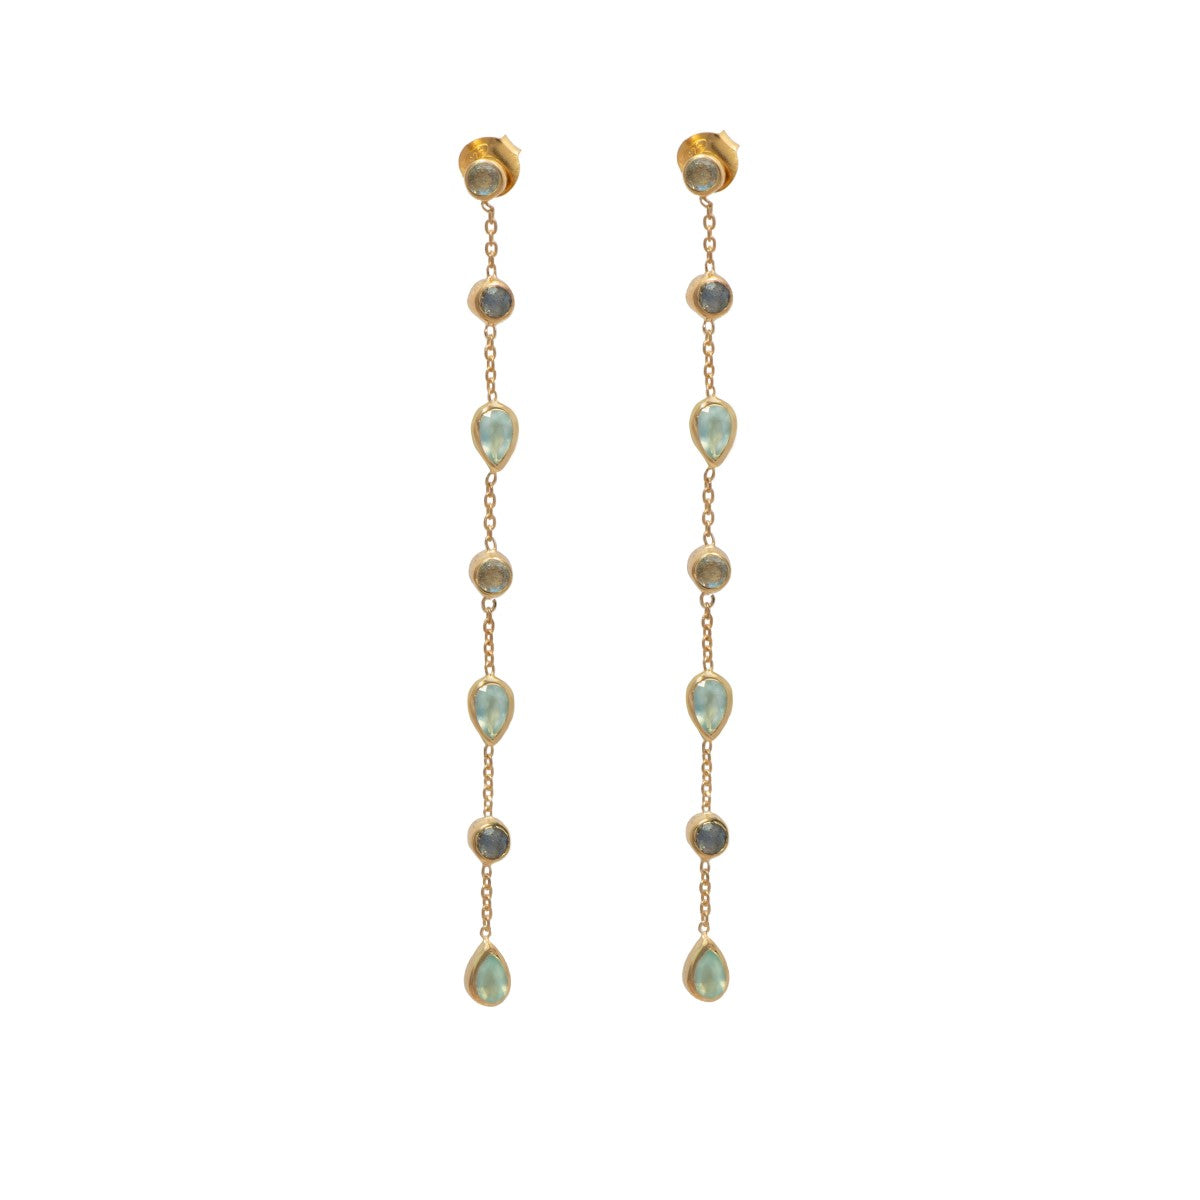 Long fine earrings with small round and teardrop gemstones - Aqua Chalcedony and Labradorite